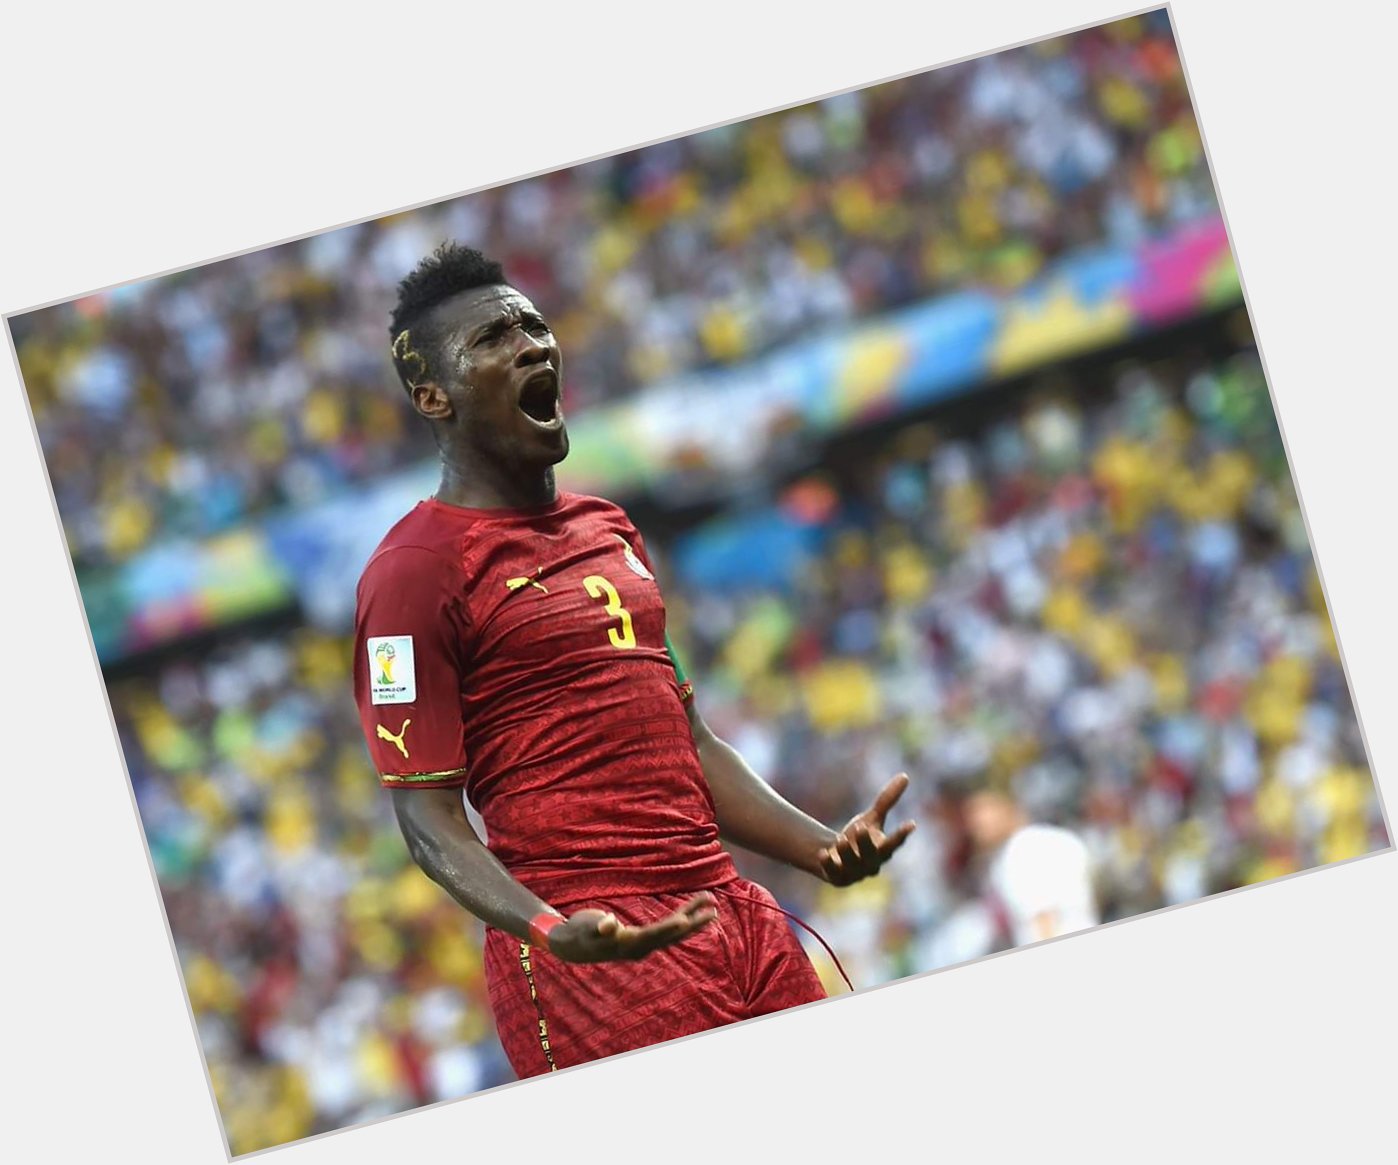 Happy Birthday our captain Asamoah Gyan. Age well legend 